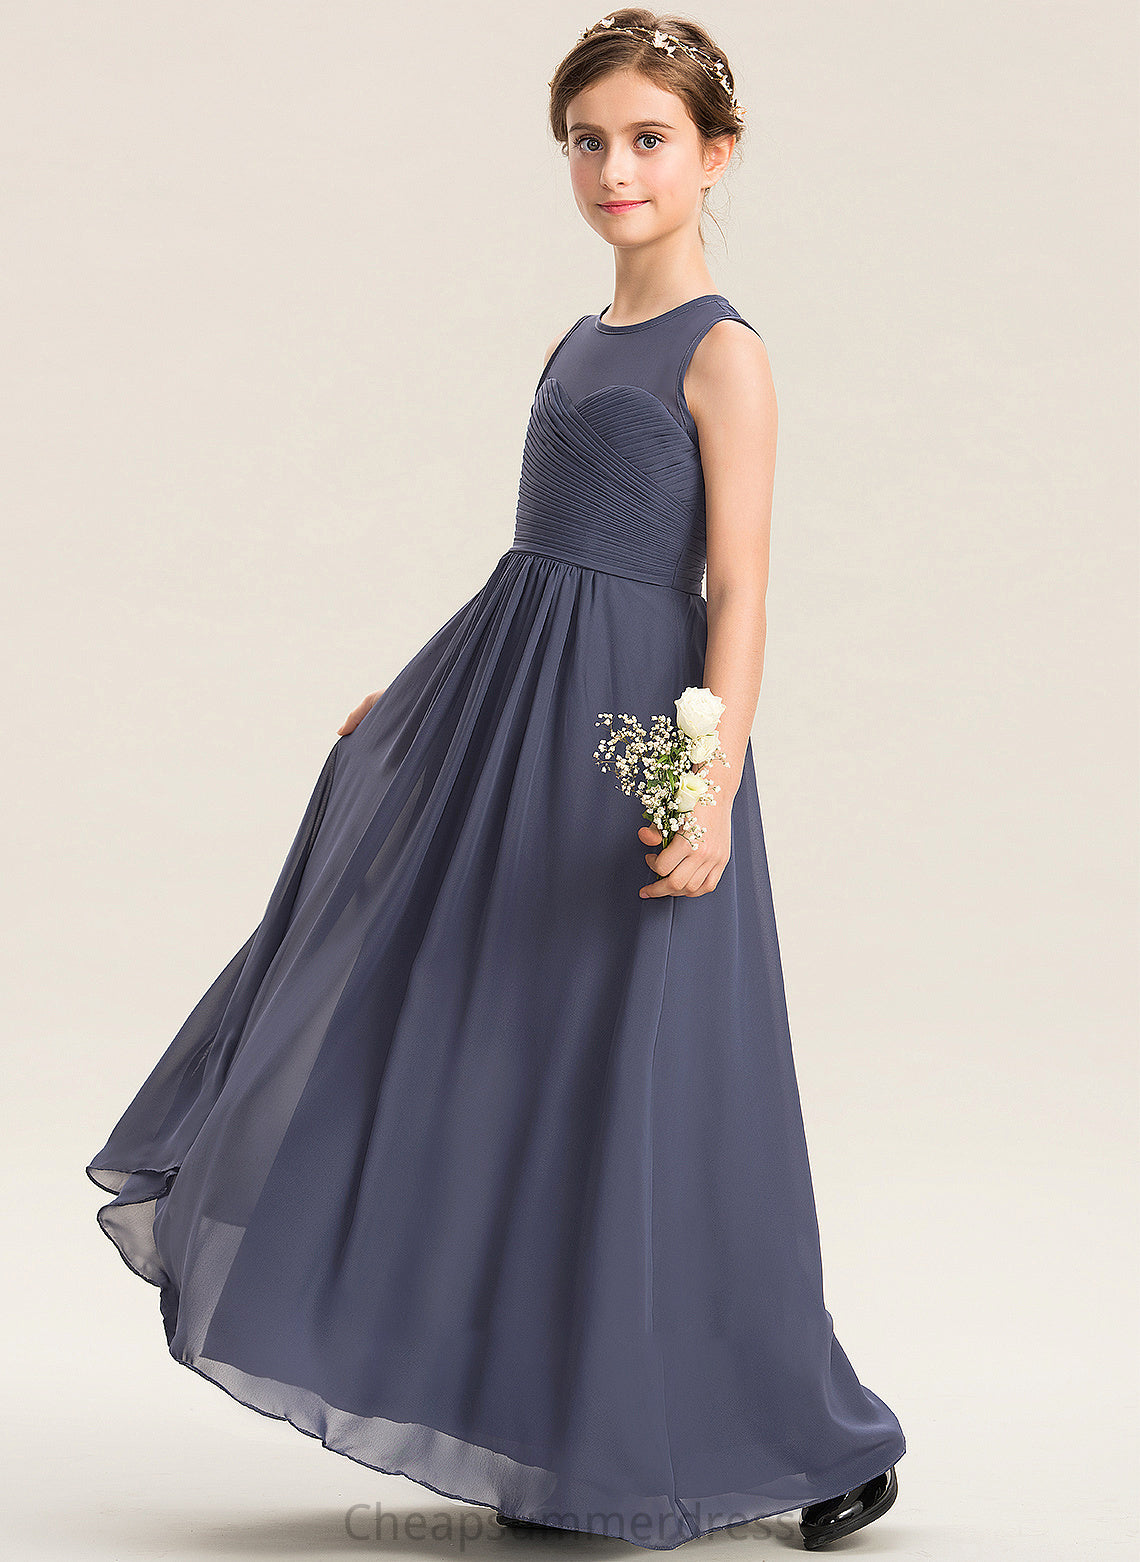 Scoop A-Line Junior Bridesmaid Dresses Floor-Length Neck Chiffon Ruffle Rory With